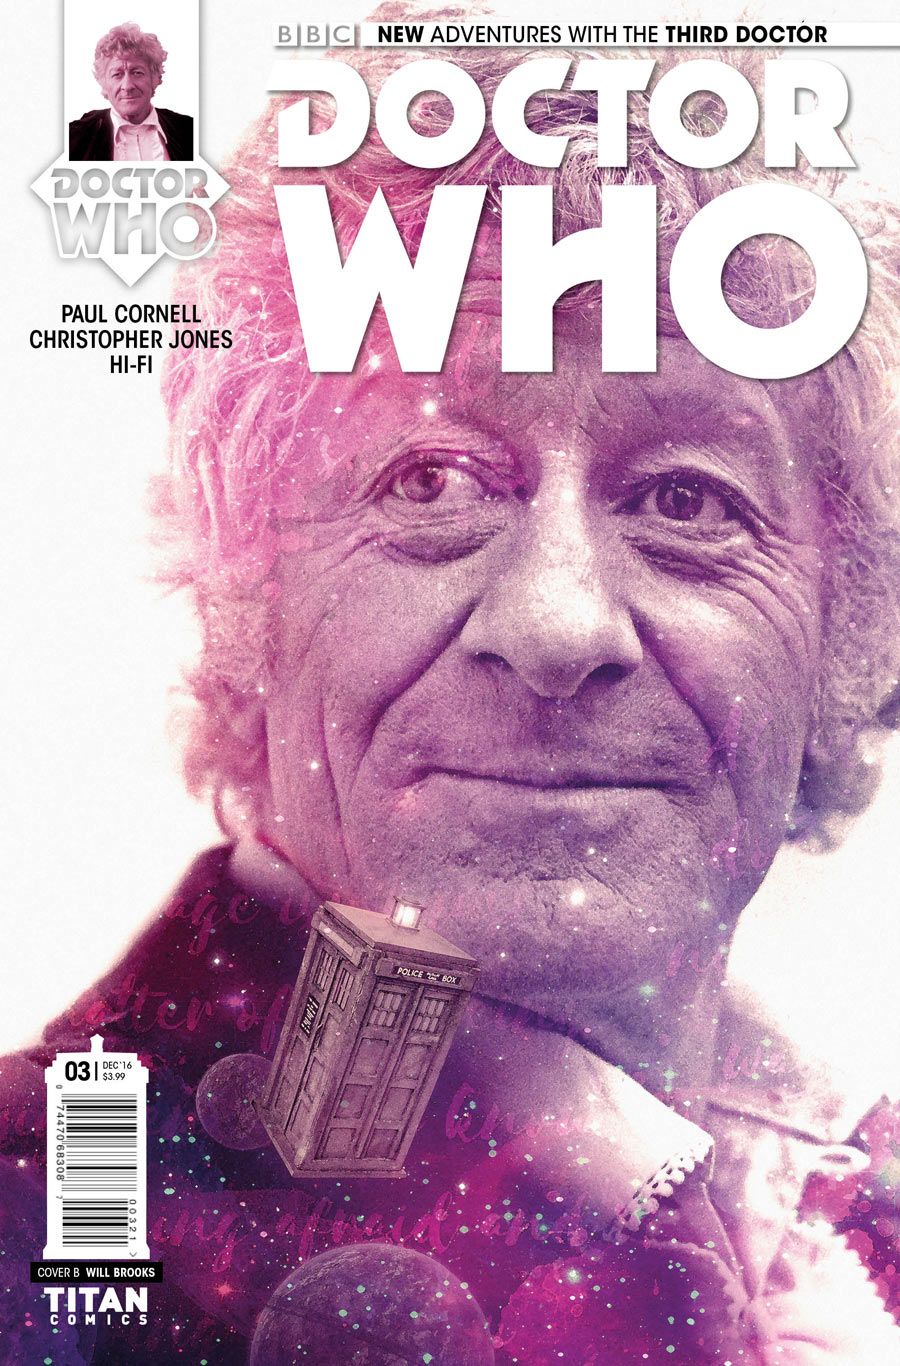 doctor_who_3d_03_cover_b_will_brooks